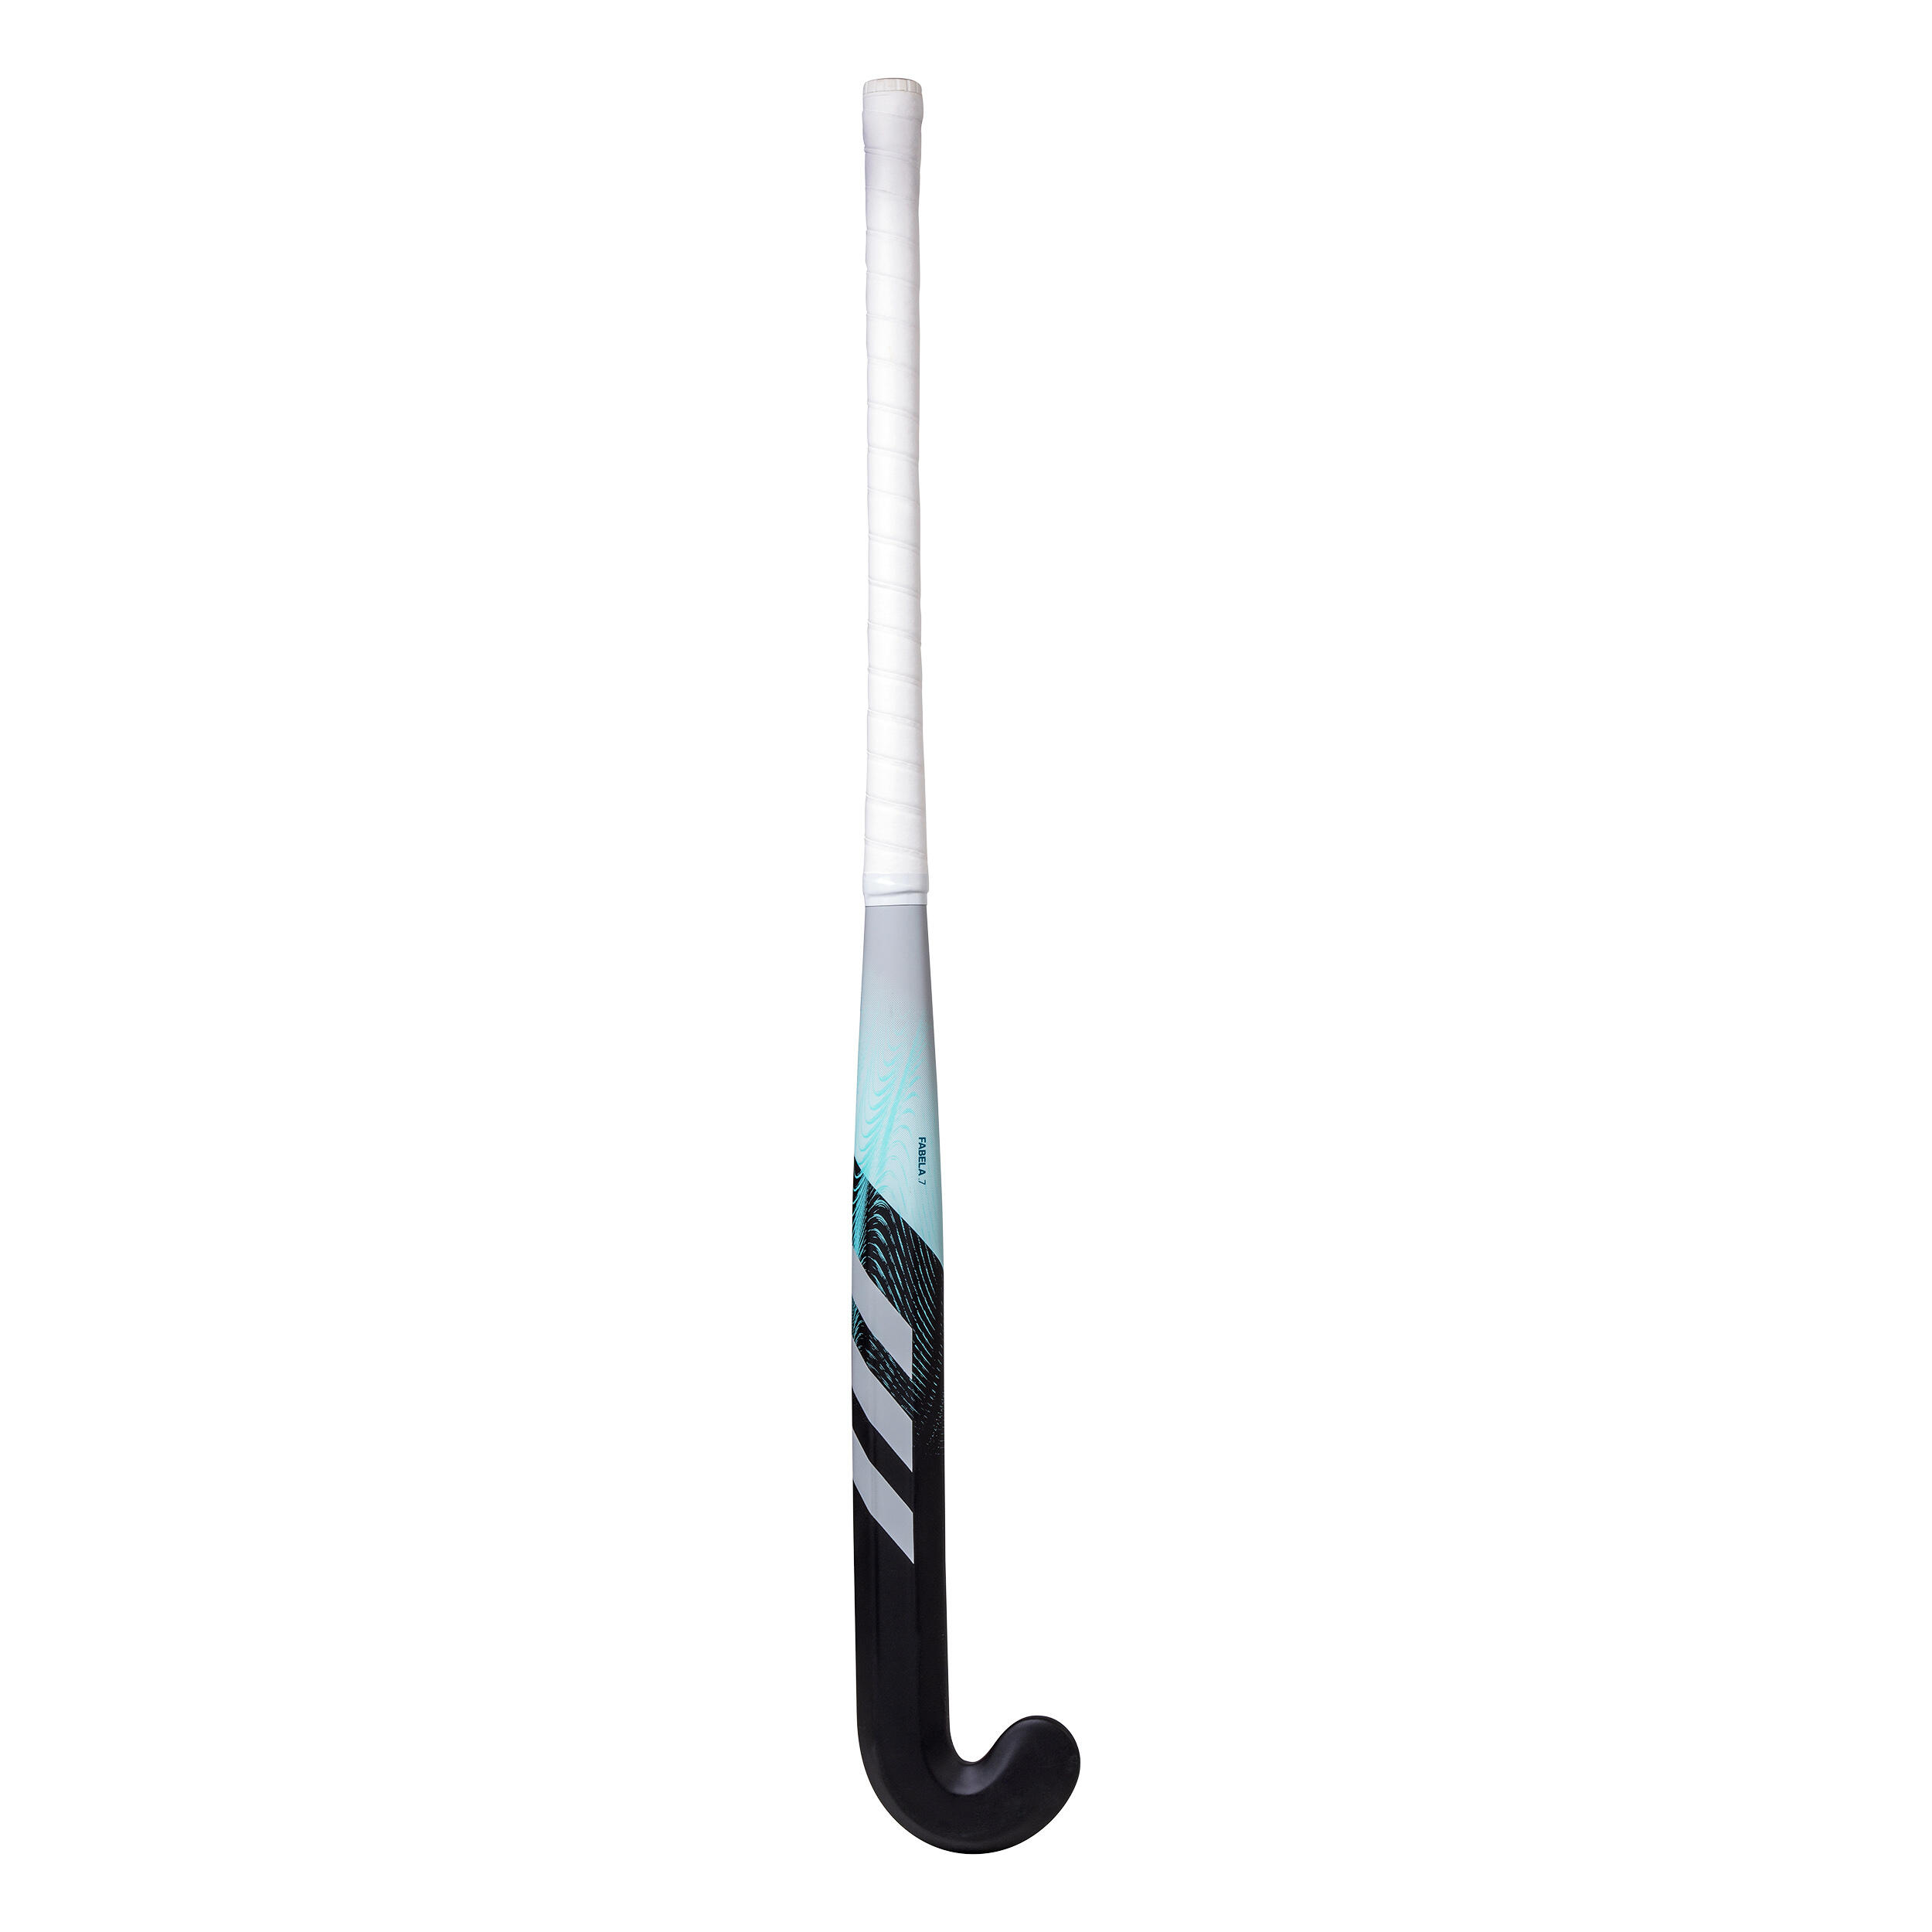 Adult Intermediate 20% Carbon Mid Bow Field Hockey Stick Fabela .7 - Black/Turquoise 6/12